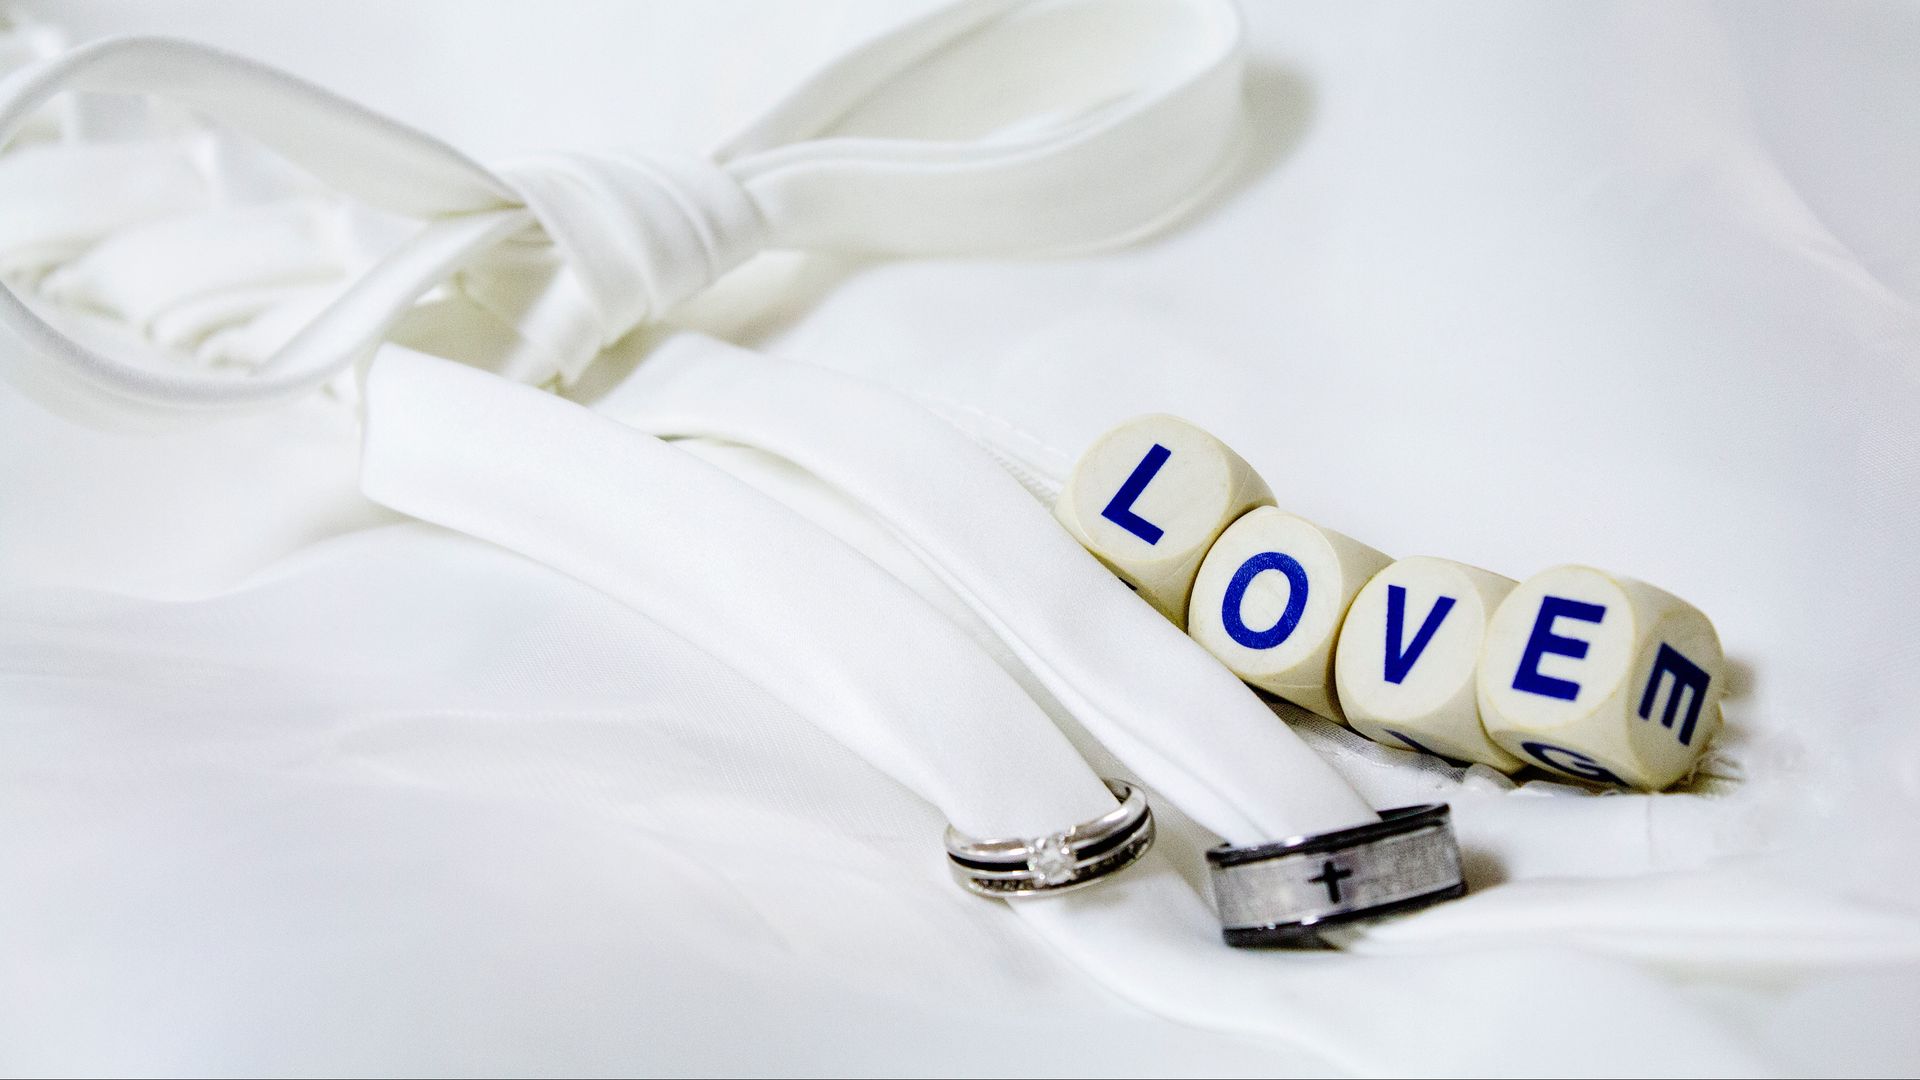 Download wallpaper 1920x1080 love, letters, rings, wedding full hd, hdtv,  fhd, 1080p hd background